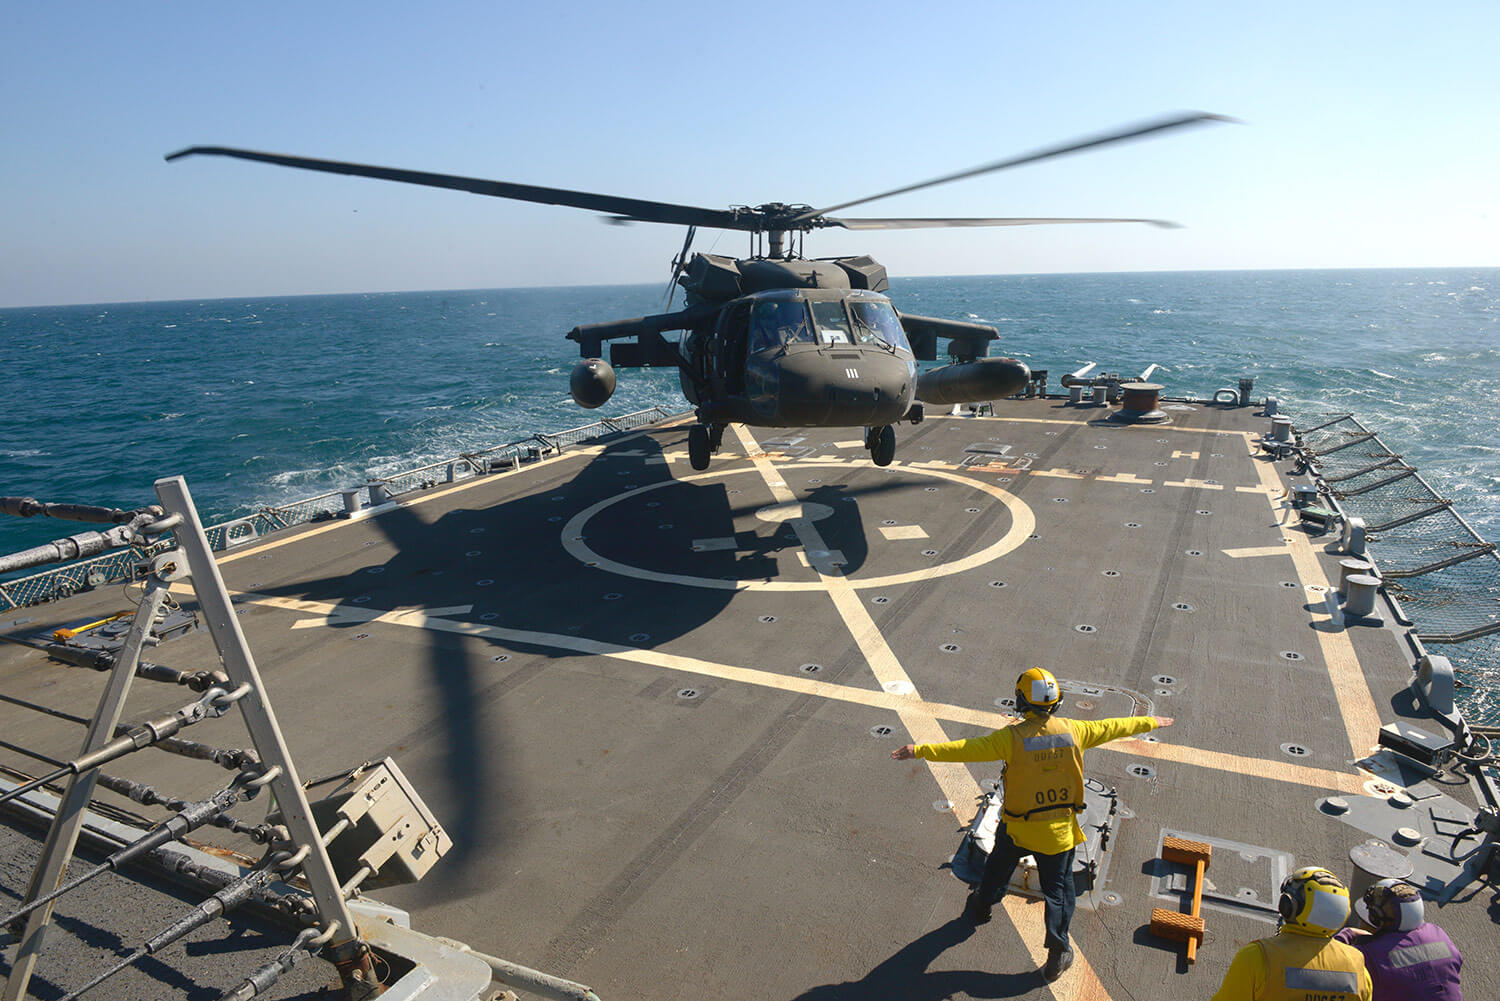 Aviators with the Minnesota, Texas and Utah National Guards, led by the Kansas National Guard’s 1st Battalion, 108th Aviation Regiment, practice landing and taking off during deck landing qualification training aboard the Arleigh Burke-class guided-missile destroyer USS Mitscher (DDG 57) in the Arabian Gulf, February 2019. Minnesota Army National Guard photo by SFC Ben Houtkooper